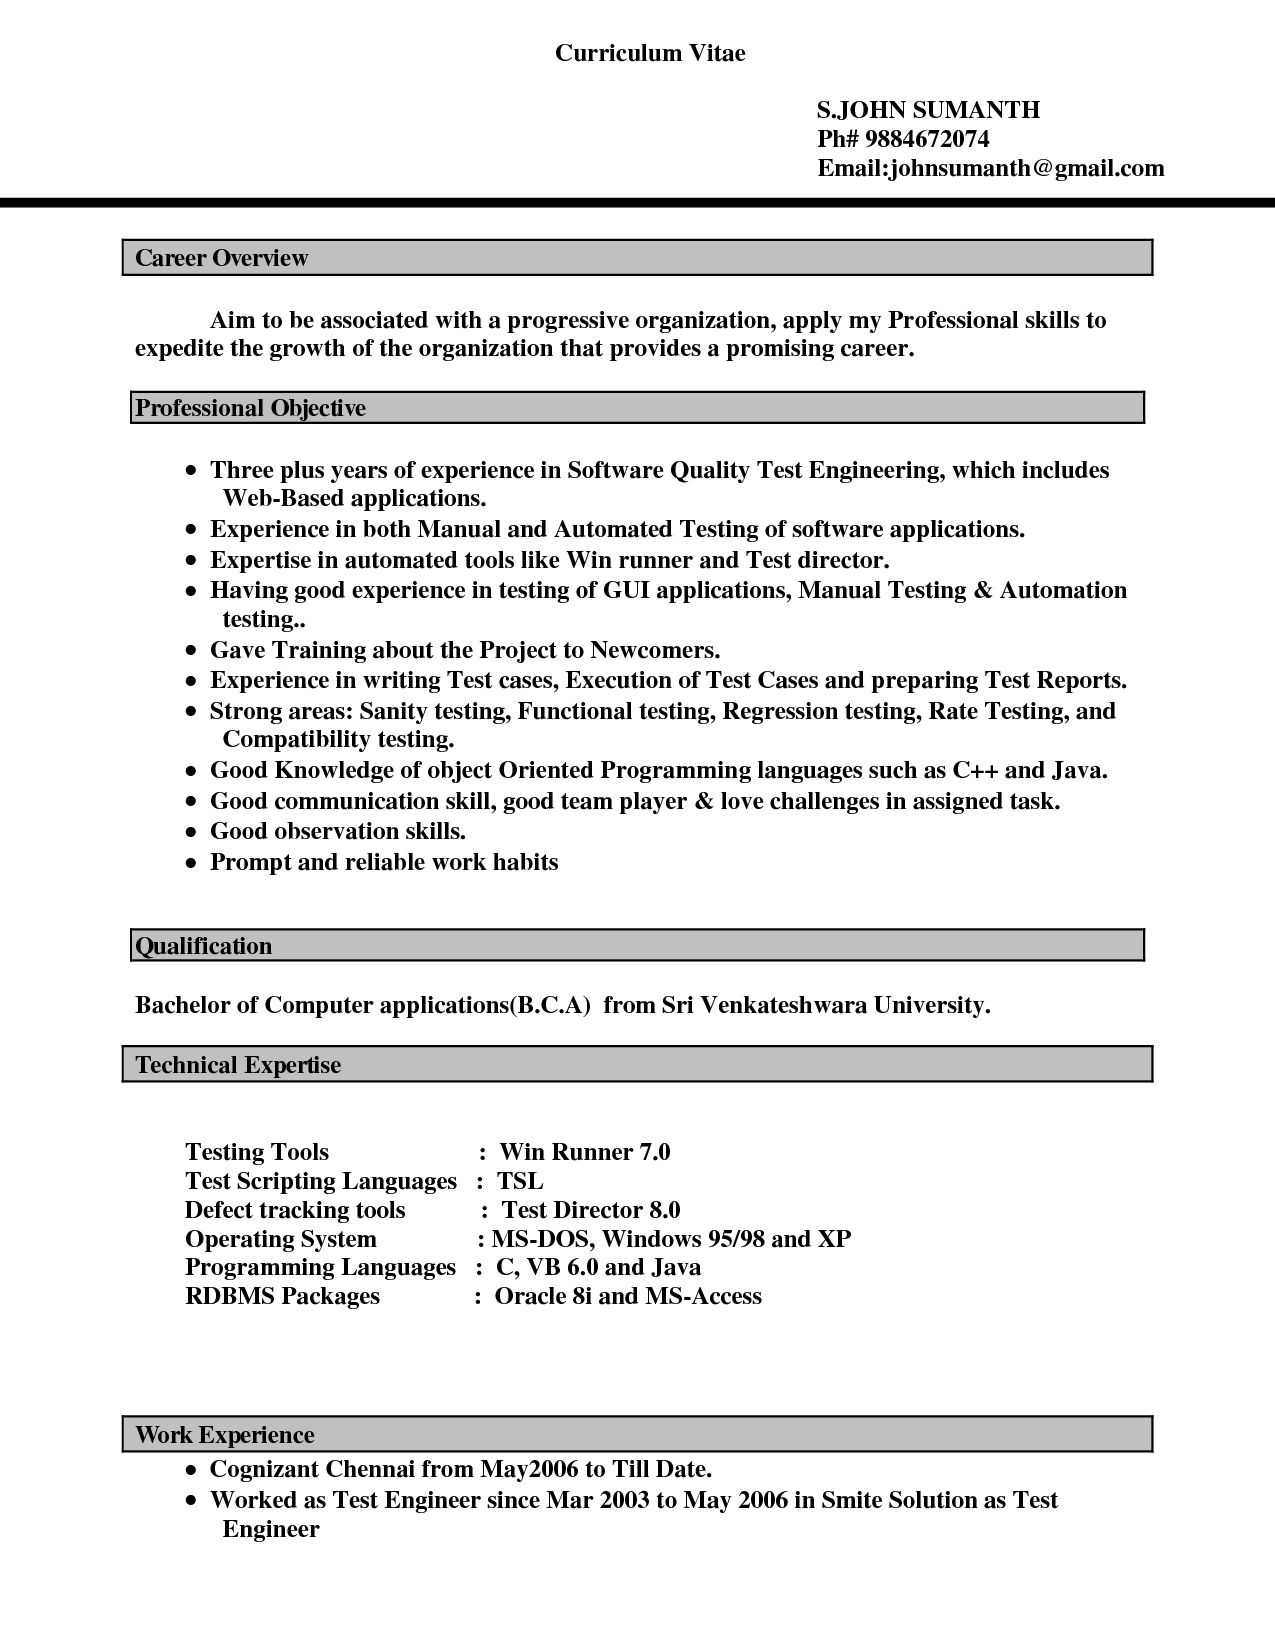 Resume ~ Pin On Resume Free Format Microsoft Word Download Throughout Simple Resume Template Microsoft Word